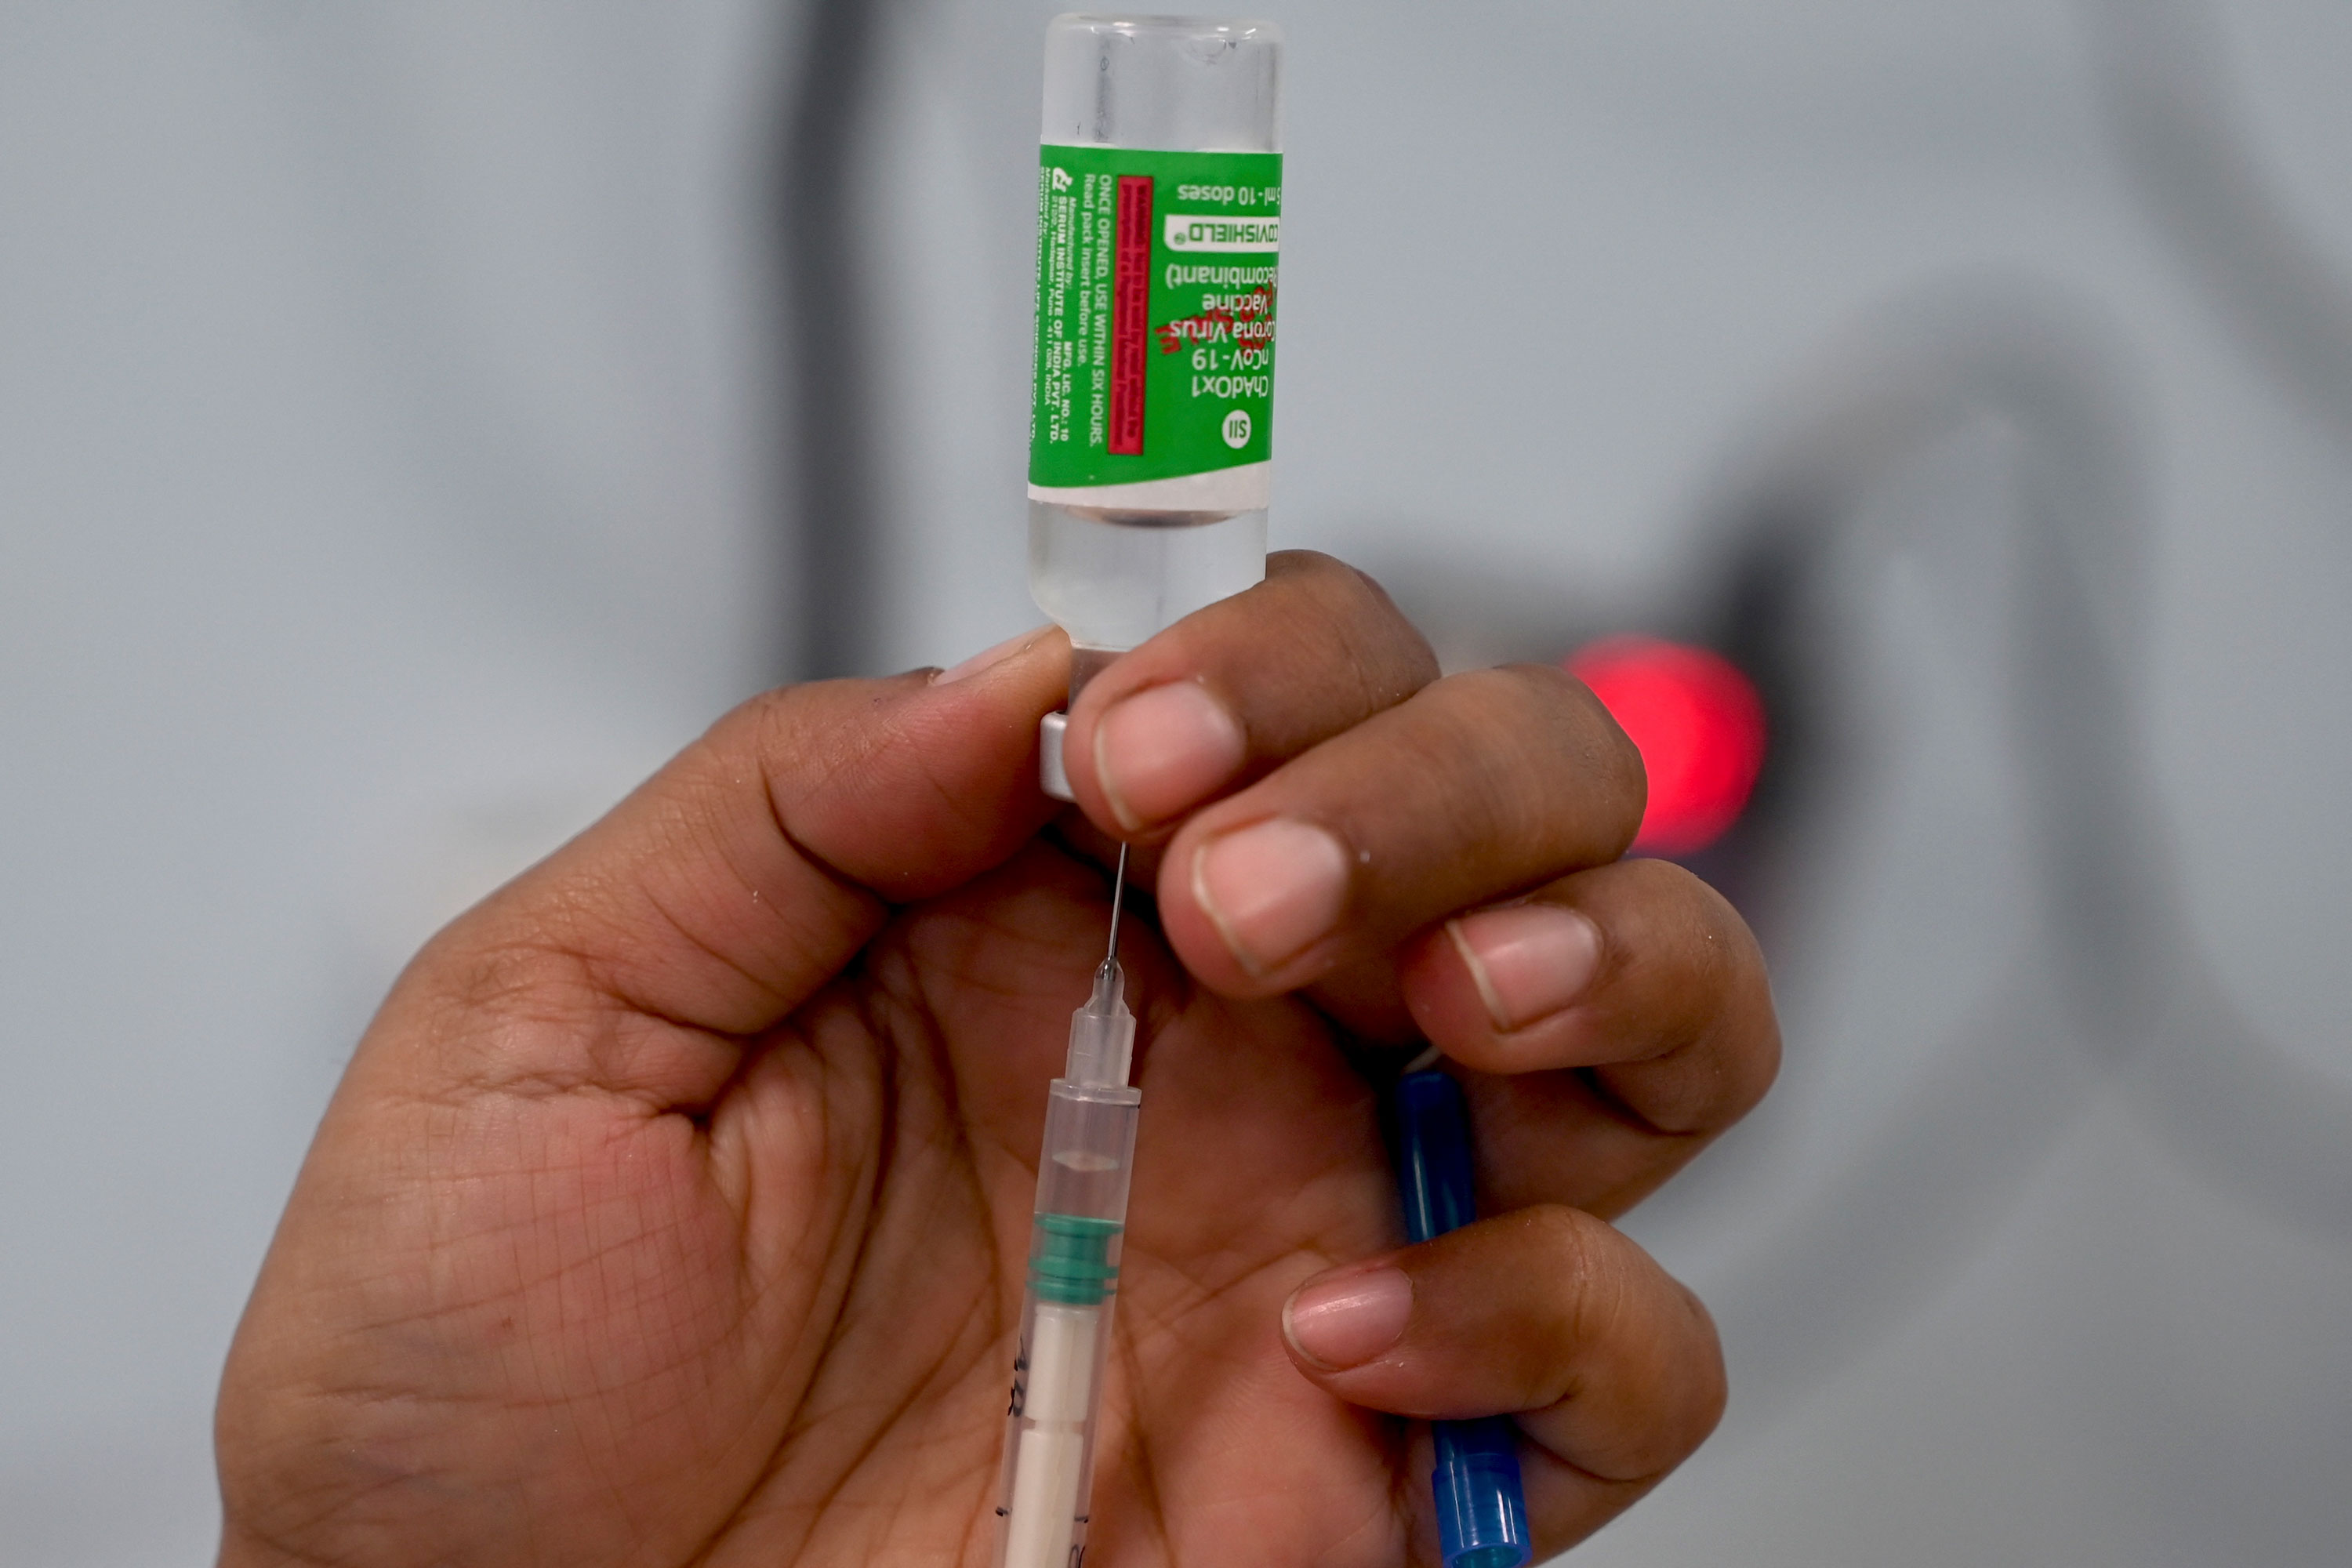 A person fills a syringe with AstraZeneca's Covishield vaccine in Mumbai, India, on March 17.